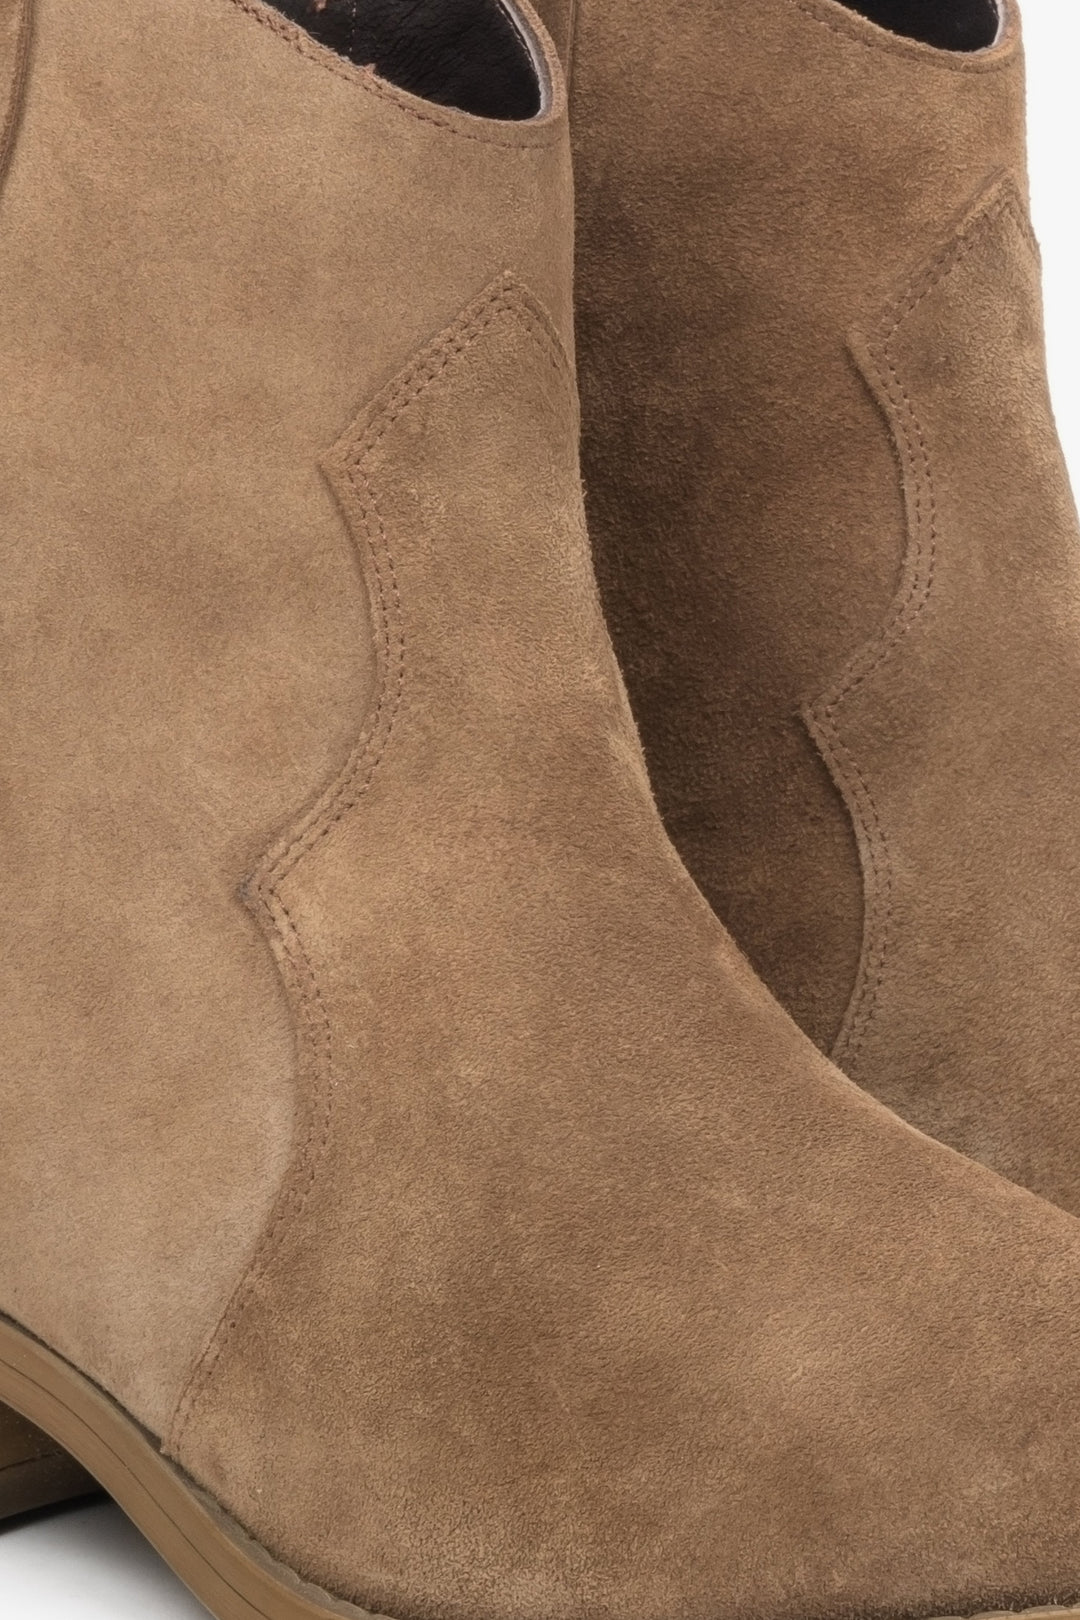 Women's brown velour pointed-toe cowboy boots by Estro.